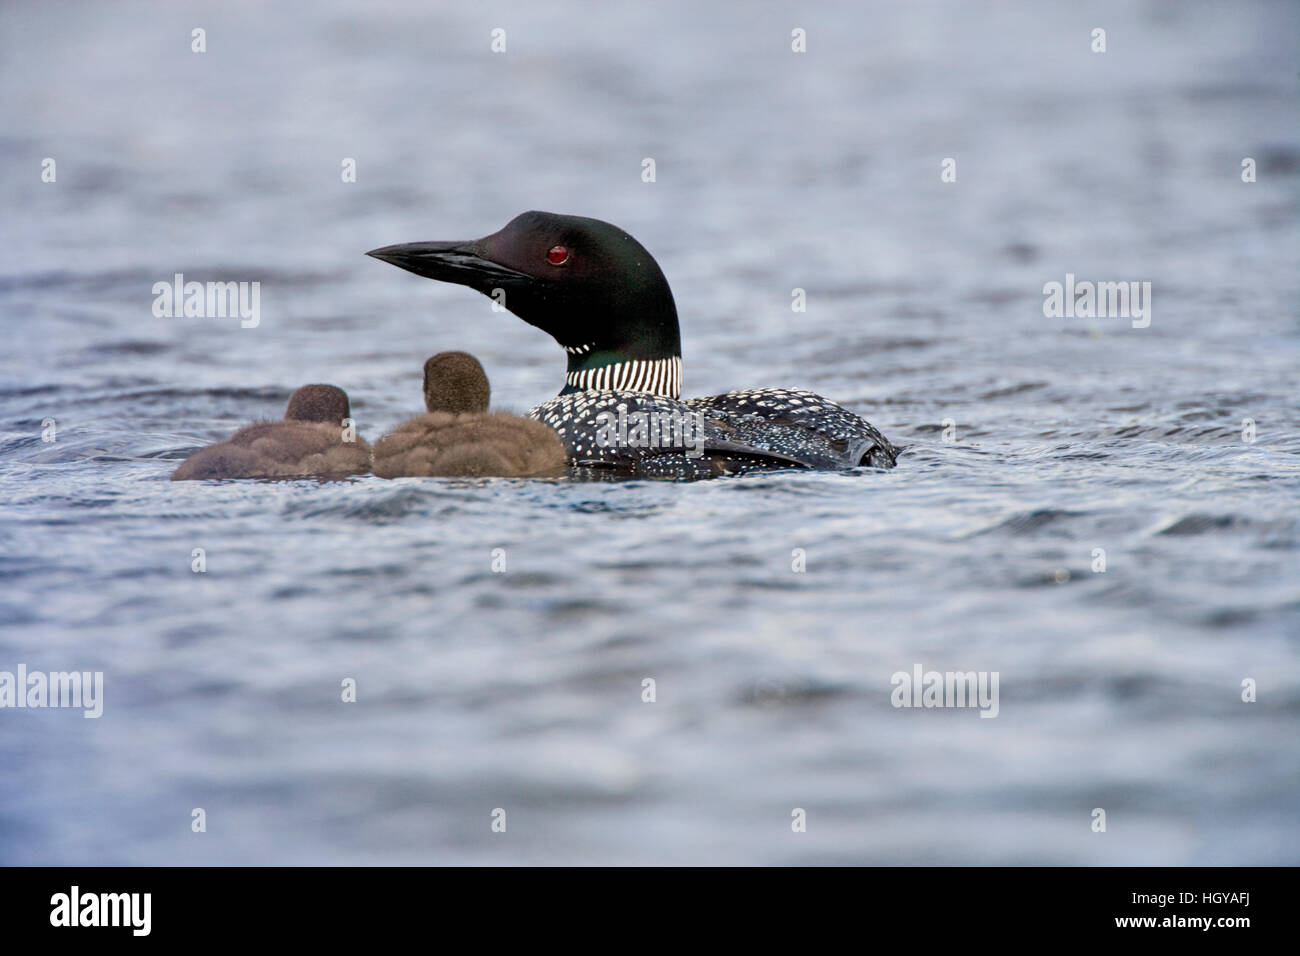 A common loon, Gavia immer, with two chicks on East Inlet in Pittsburg, New Hampshire.  A pond upstream of Second Connecticut Lake. Stock Photo